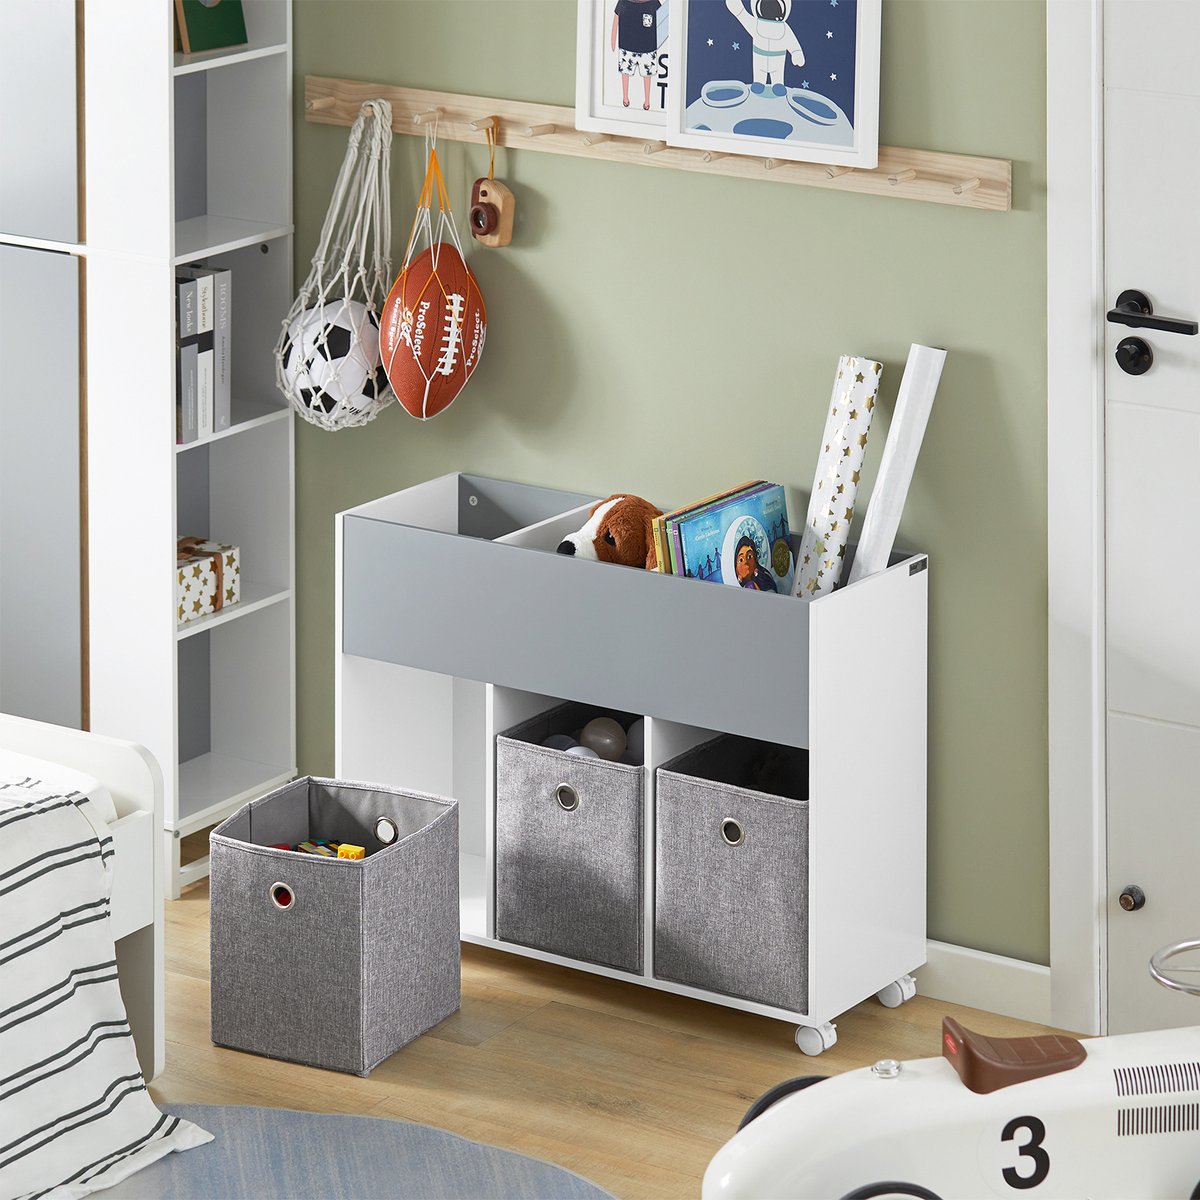 The best way to teach kids how to keep things organized is by giving them the right tool. 🤗

#kidstorage #toystorage #organizerbox #haotian #childrenroom